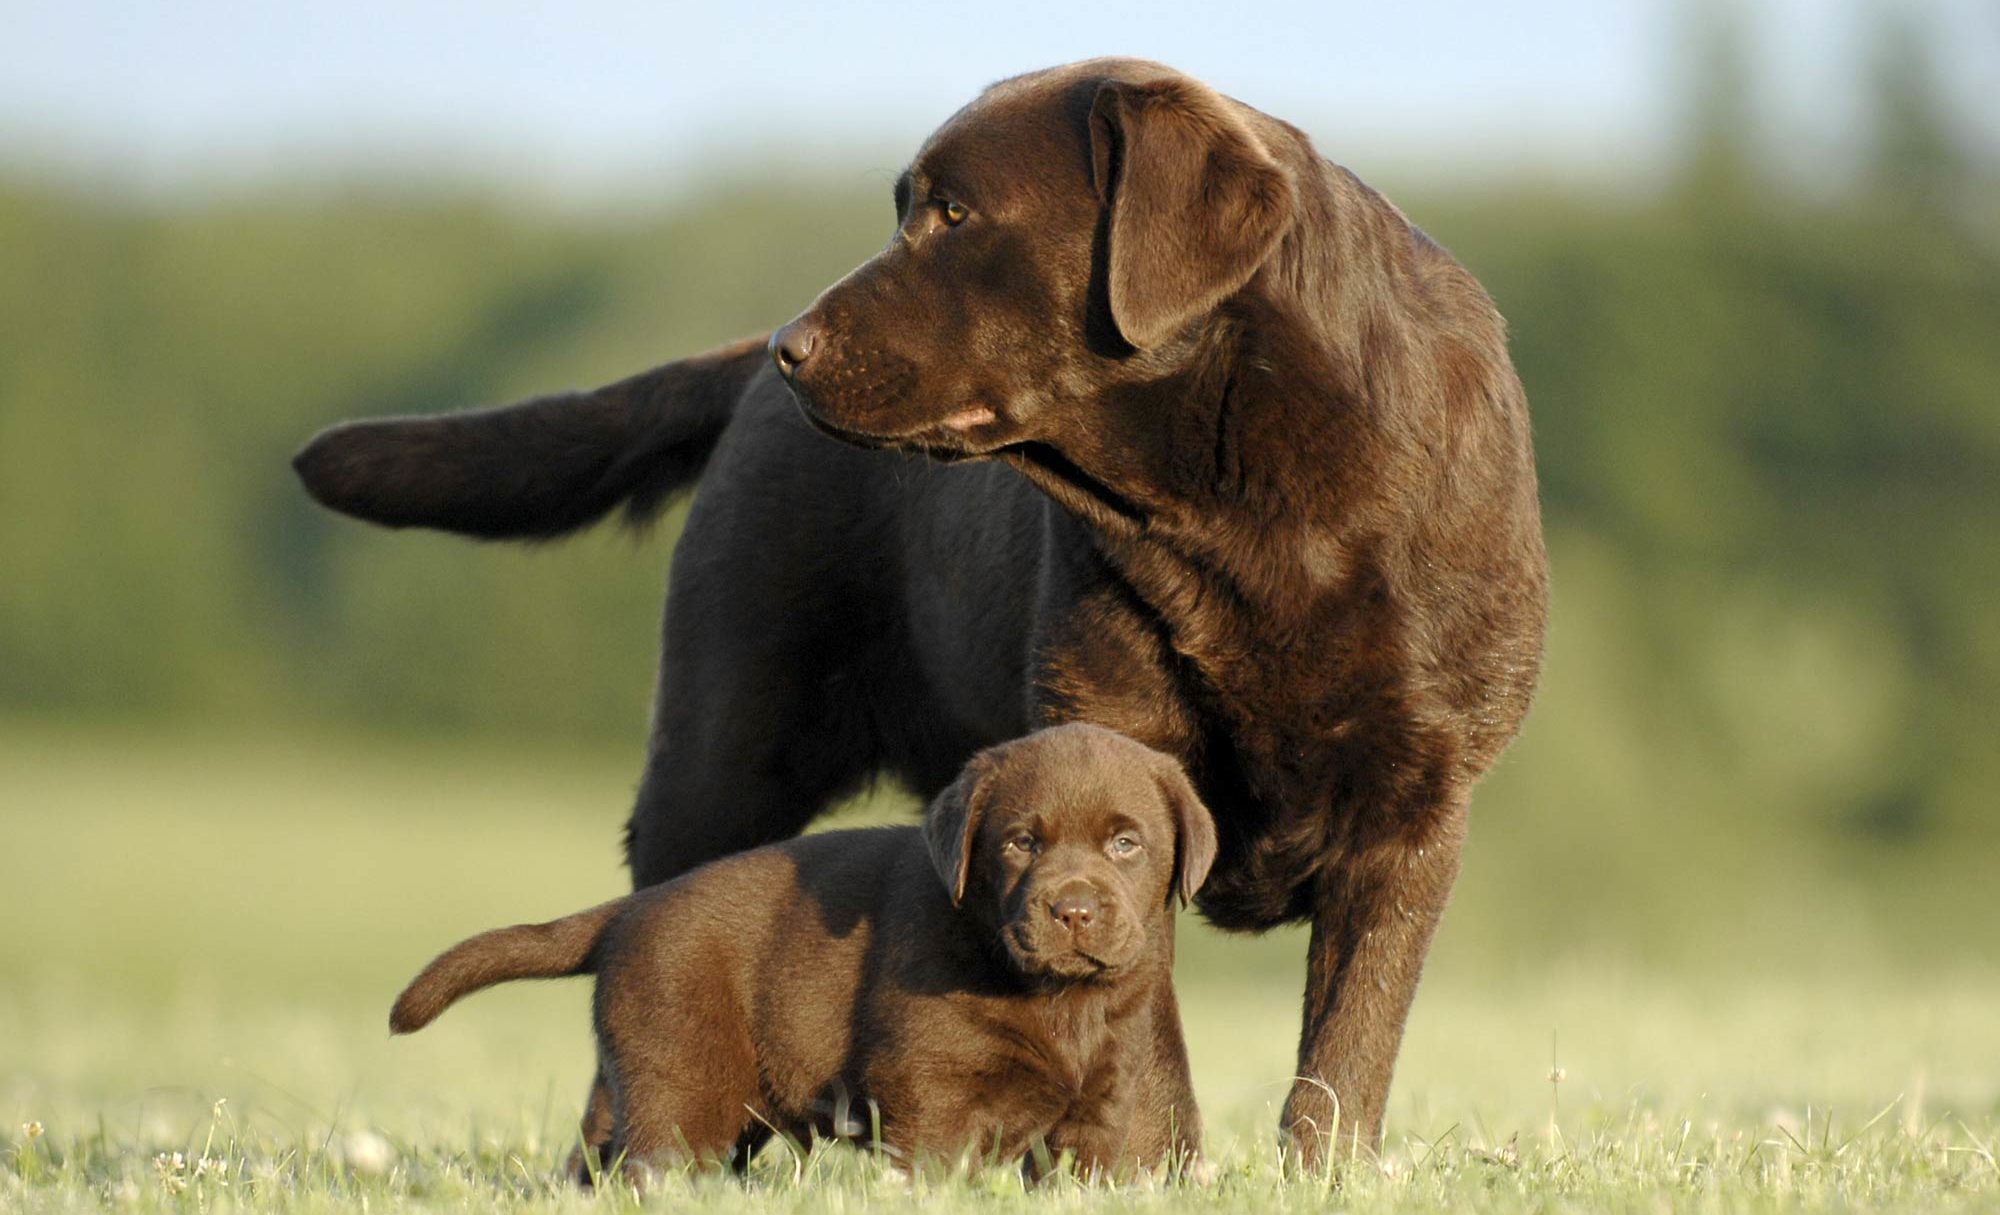 A large brown dog standing over a smaller brown puppy in an open, grassy field